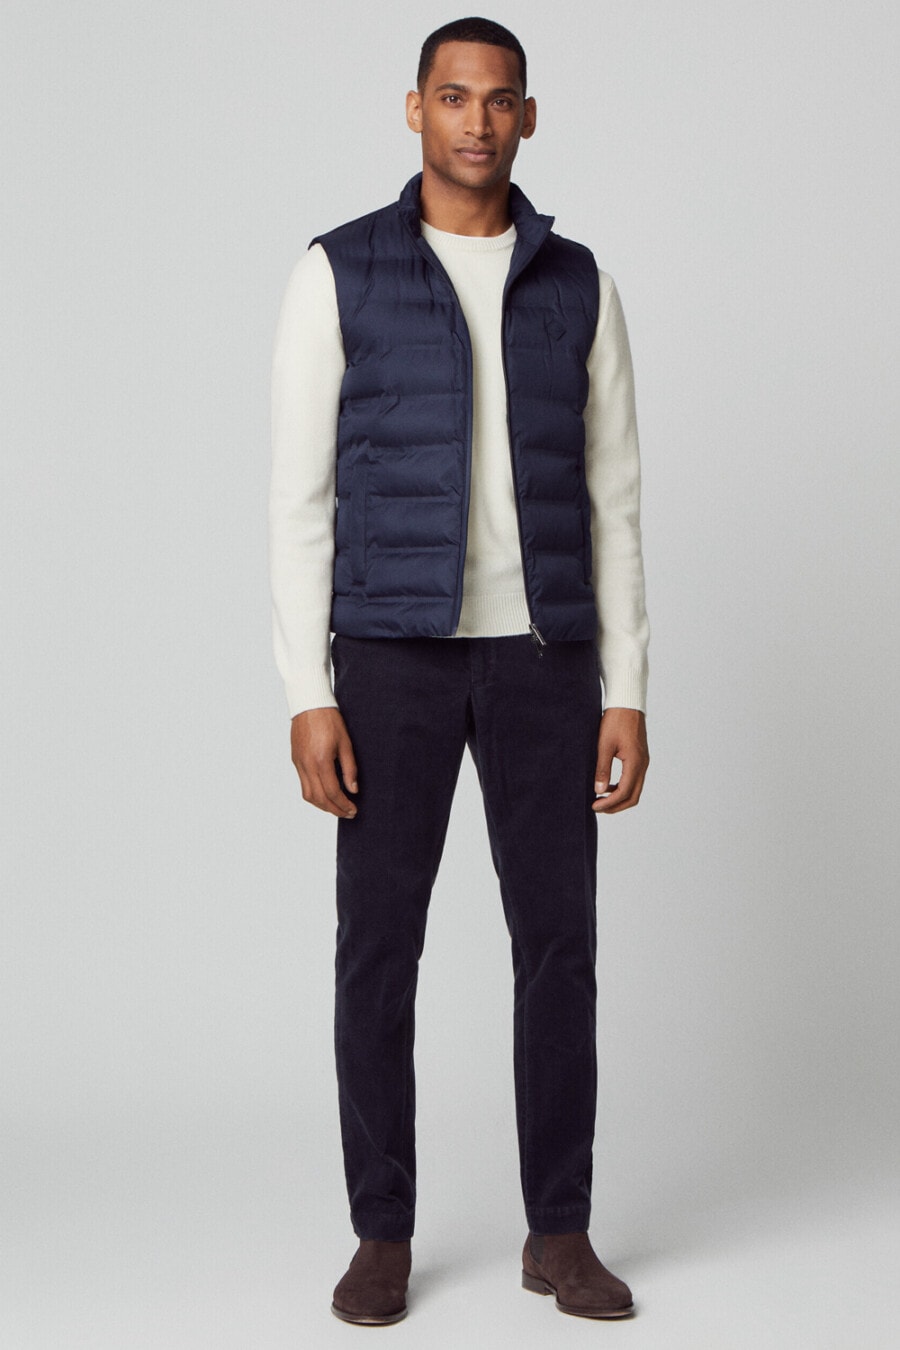 Men's navy chinos, long-sleeve white top, navy puffer jacket and brown suede Chelsea boots outfit